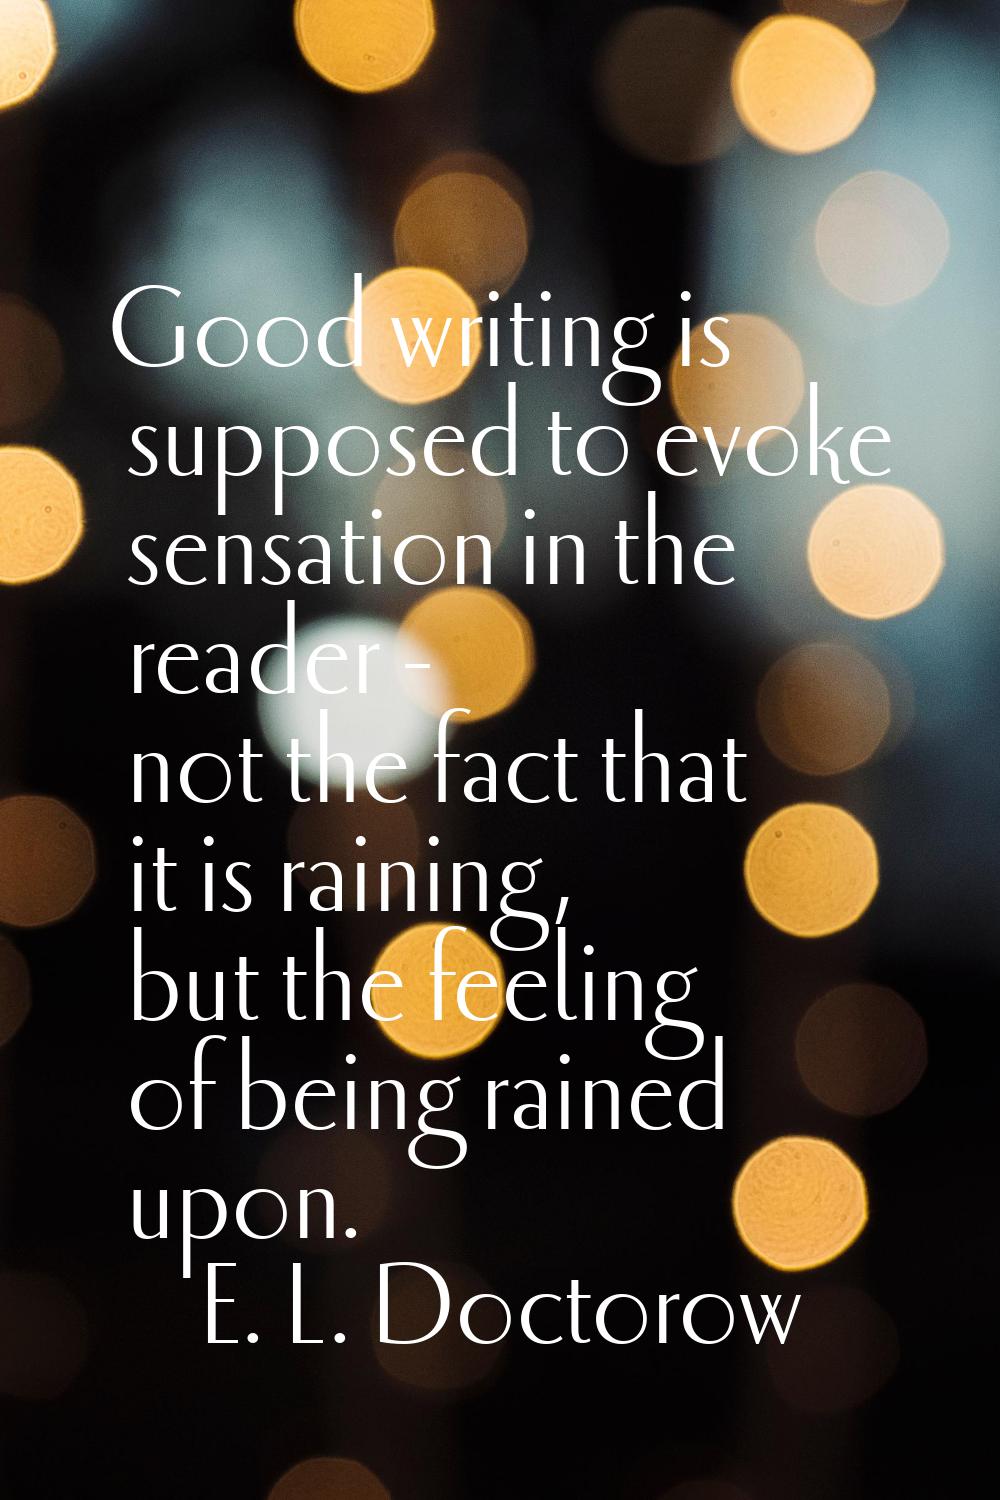 Good writing is supposed to evoke sensation in the reader - not the fact that it is raining, but th